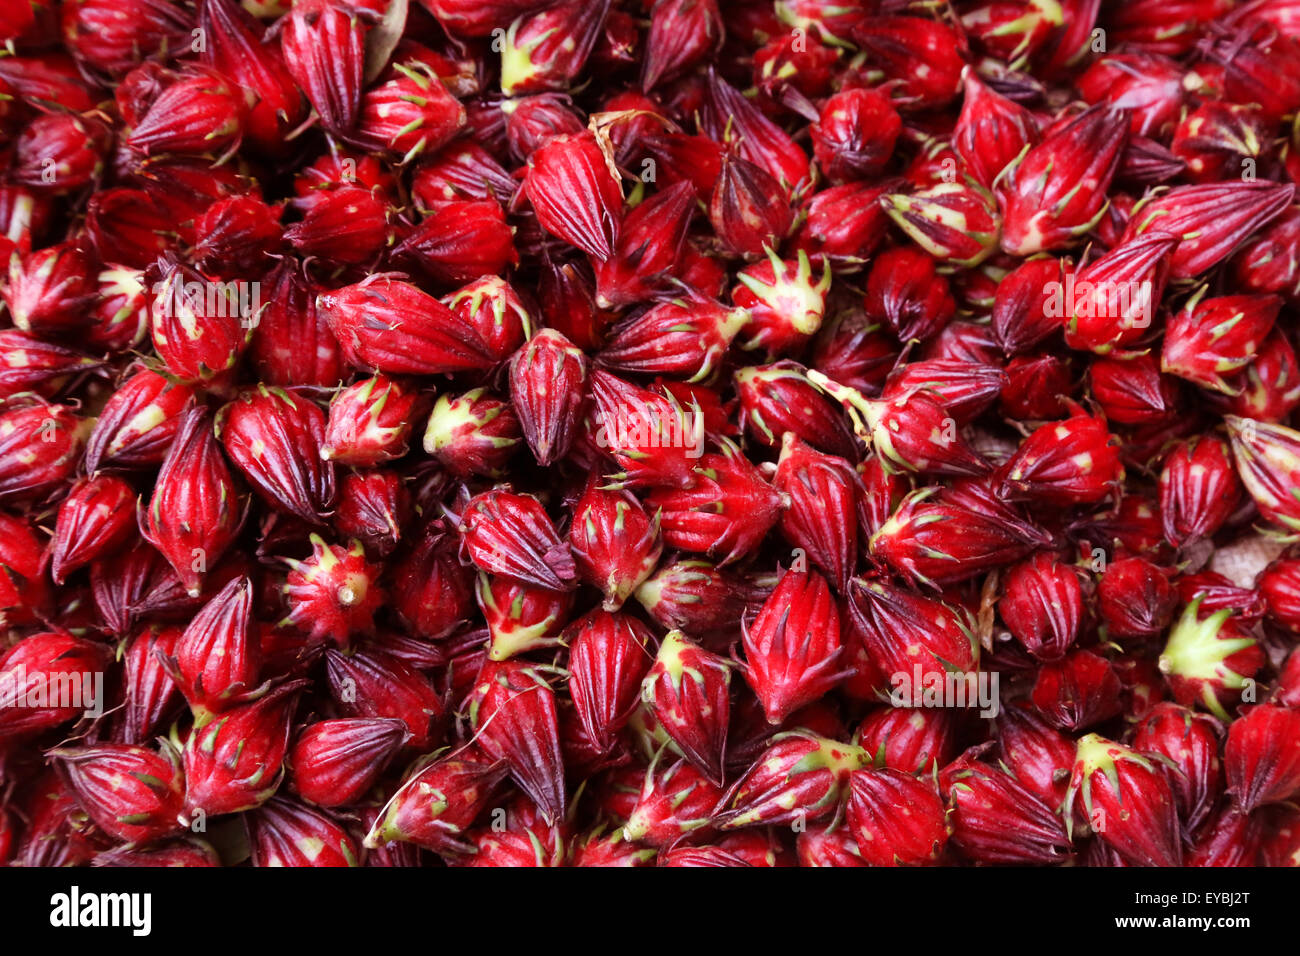 Background made of hibiscus sabdariffa or roselle fruits Stock Photo